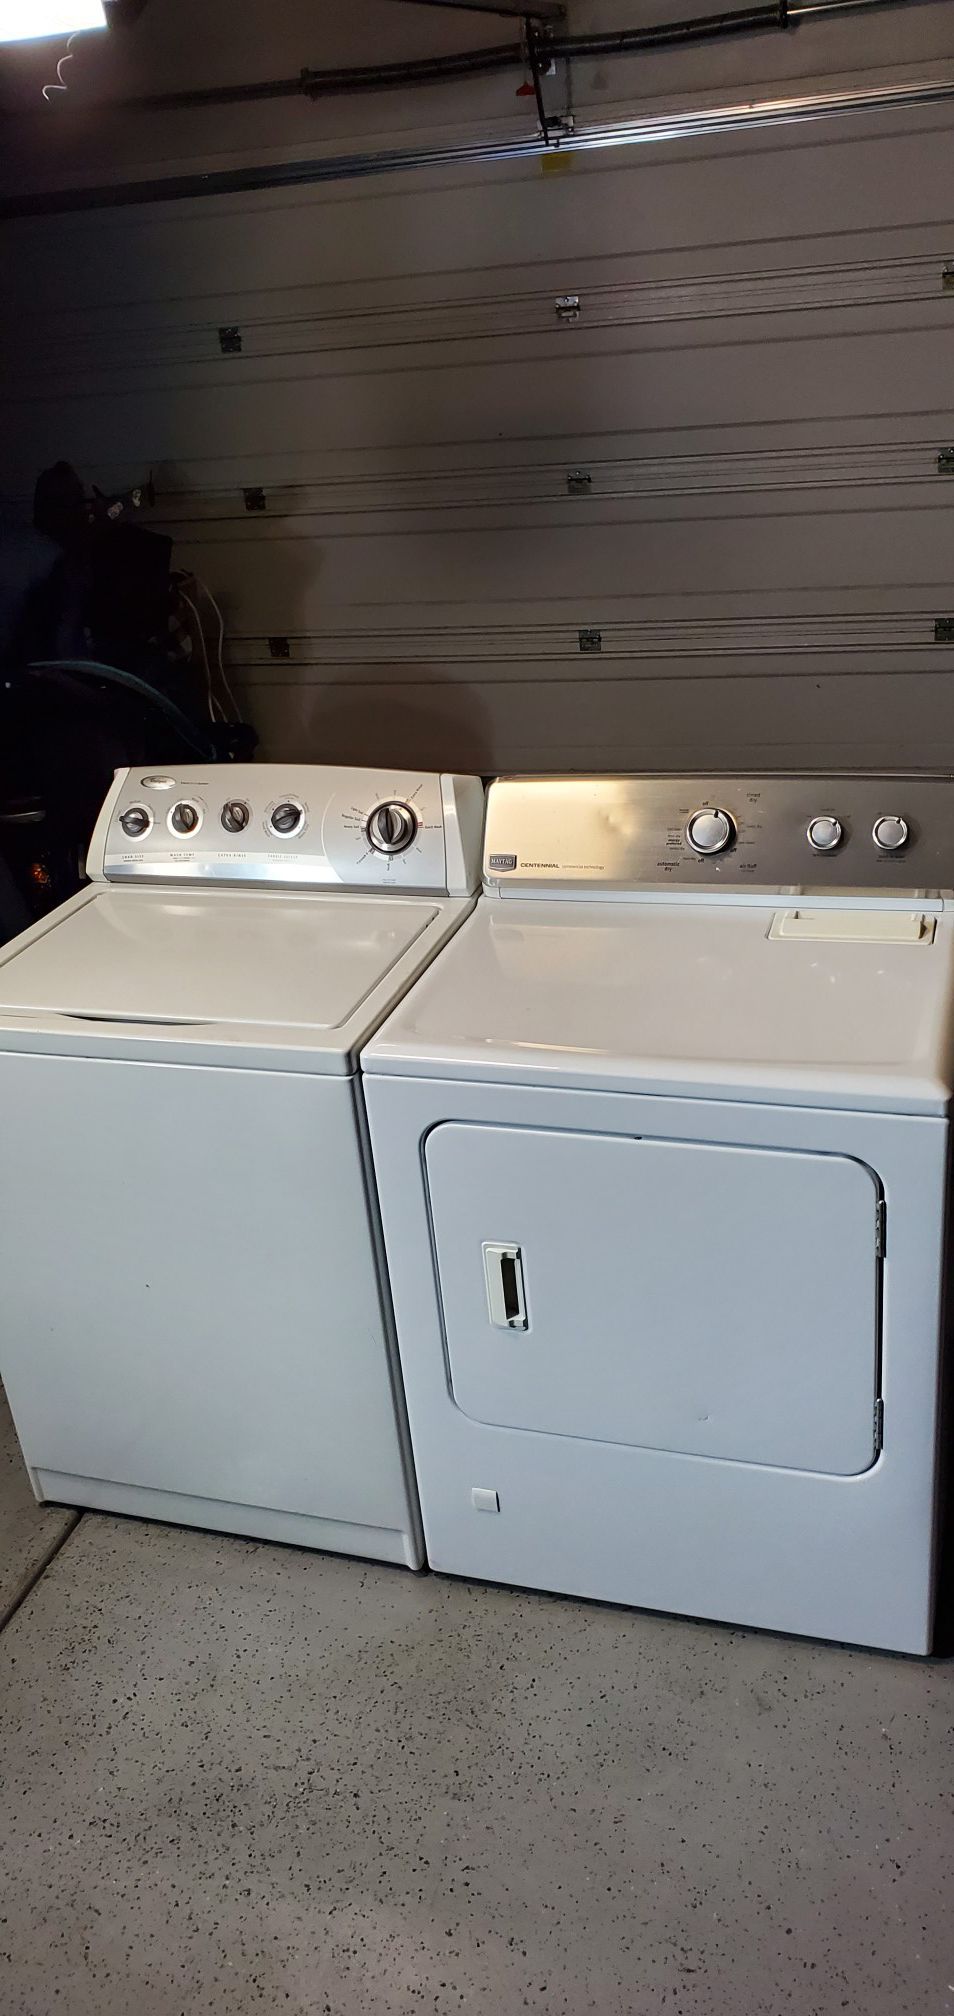 Whirlpool Washer And Maytag Centennial Gas Dryer